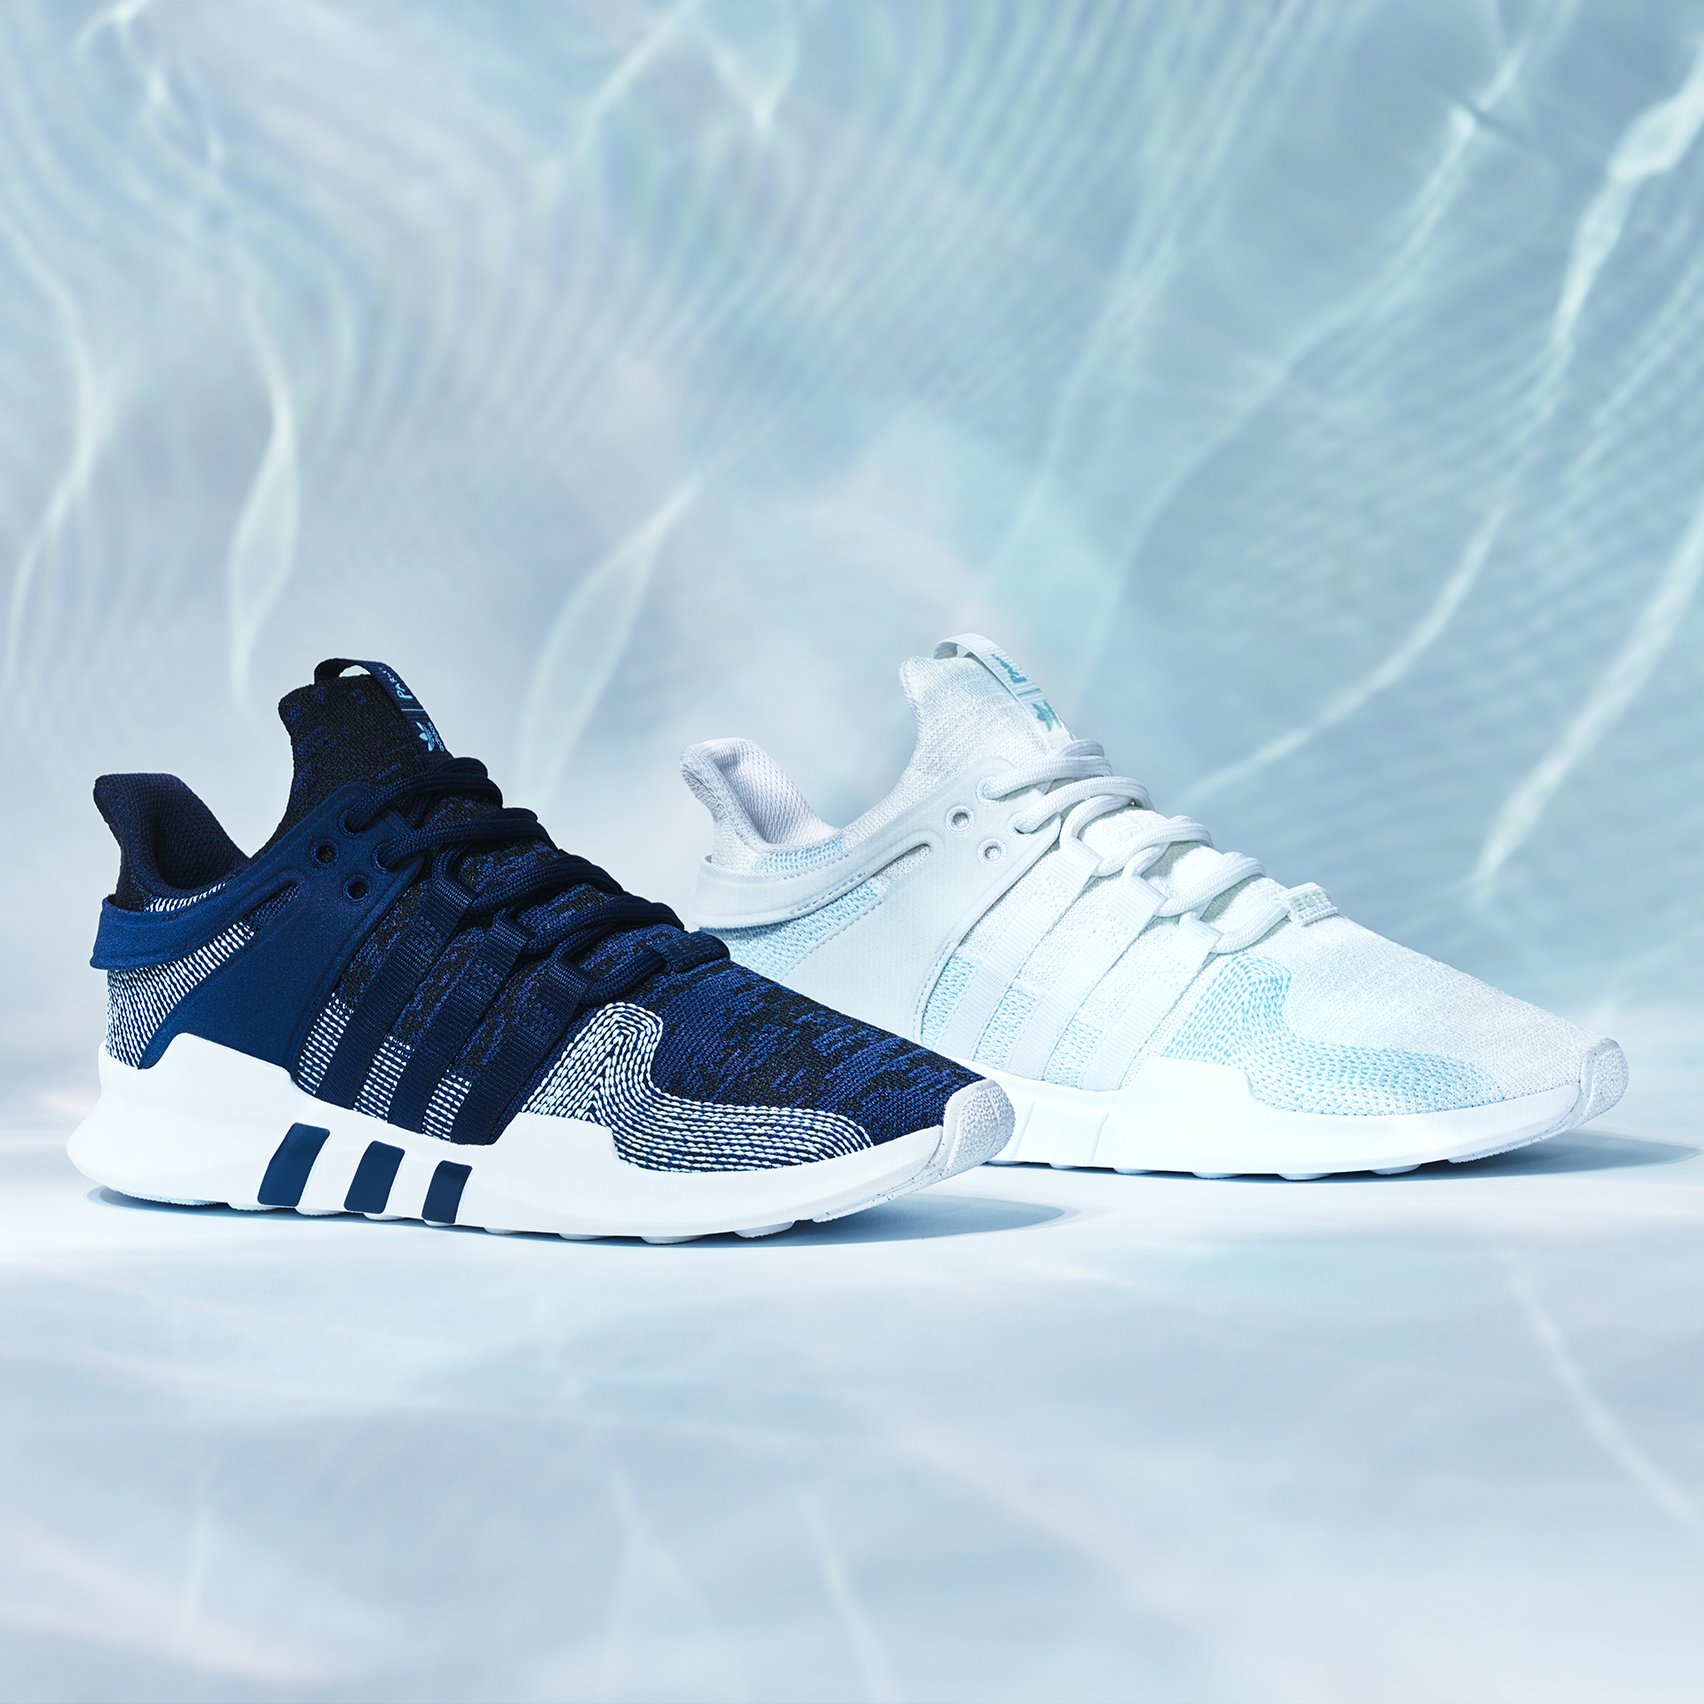 adidas en Twitter: "The EQT ADV; using Parley Ocean Plastic @adidasOriginals and @Parleyxxx unite to turn a problem into progress. #adidasParley #EQT https://t.co/0yB6B8P6aW" / Twitter